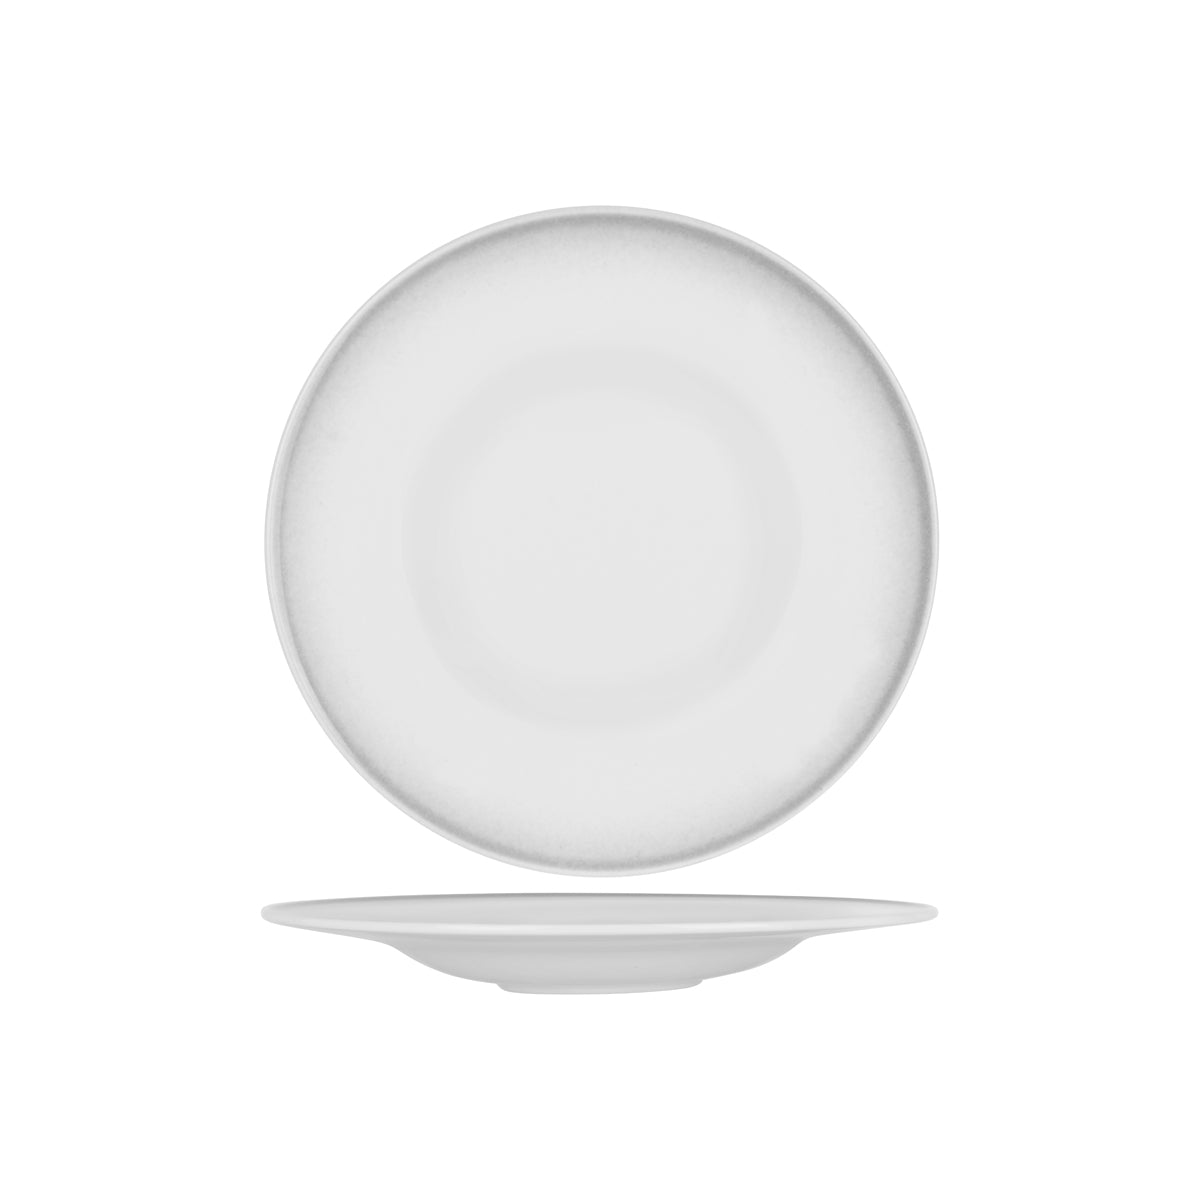 903007 Tablekraft Frosted Steel Round Signature Plate 315x125mm Tomkin Australia Hospitality Supplies